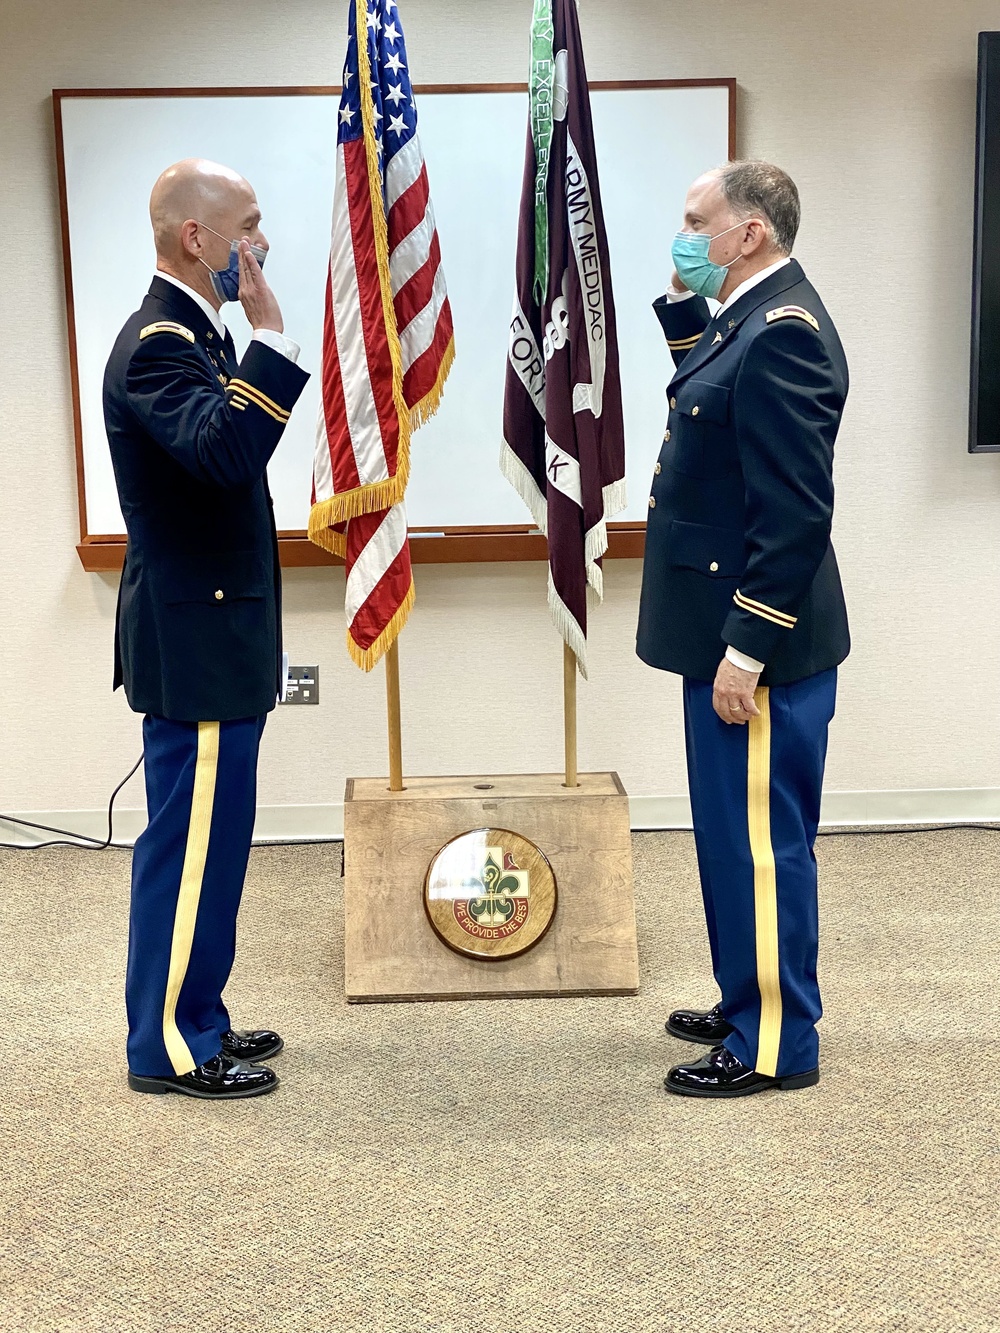 Reserve officer takes oath at BJACH